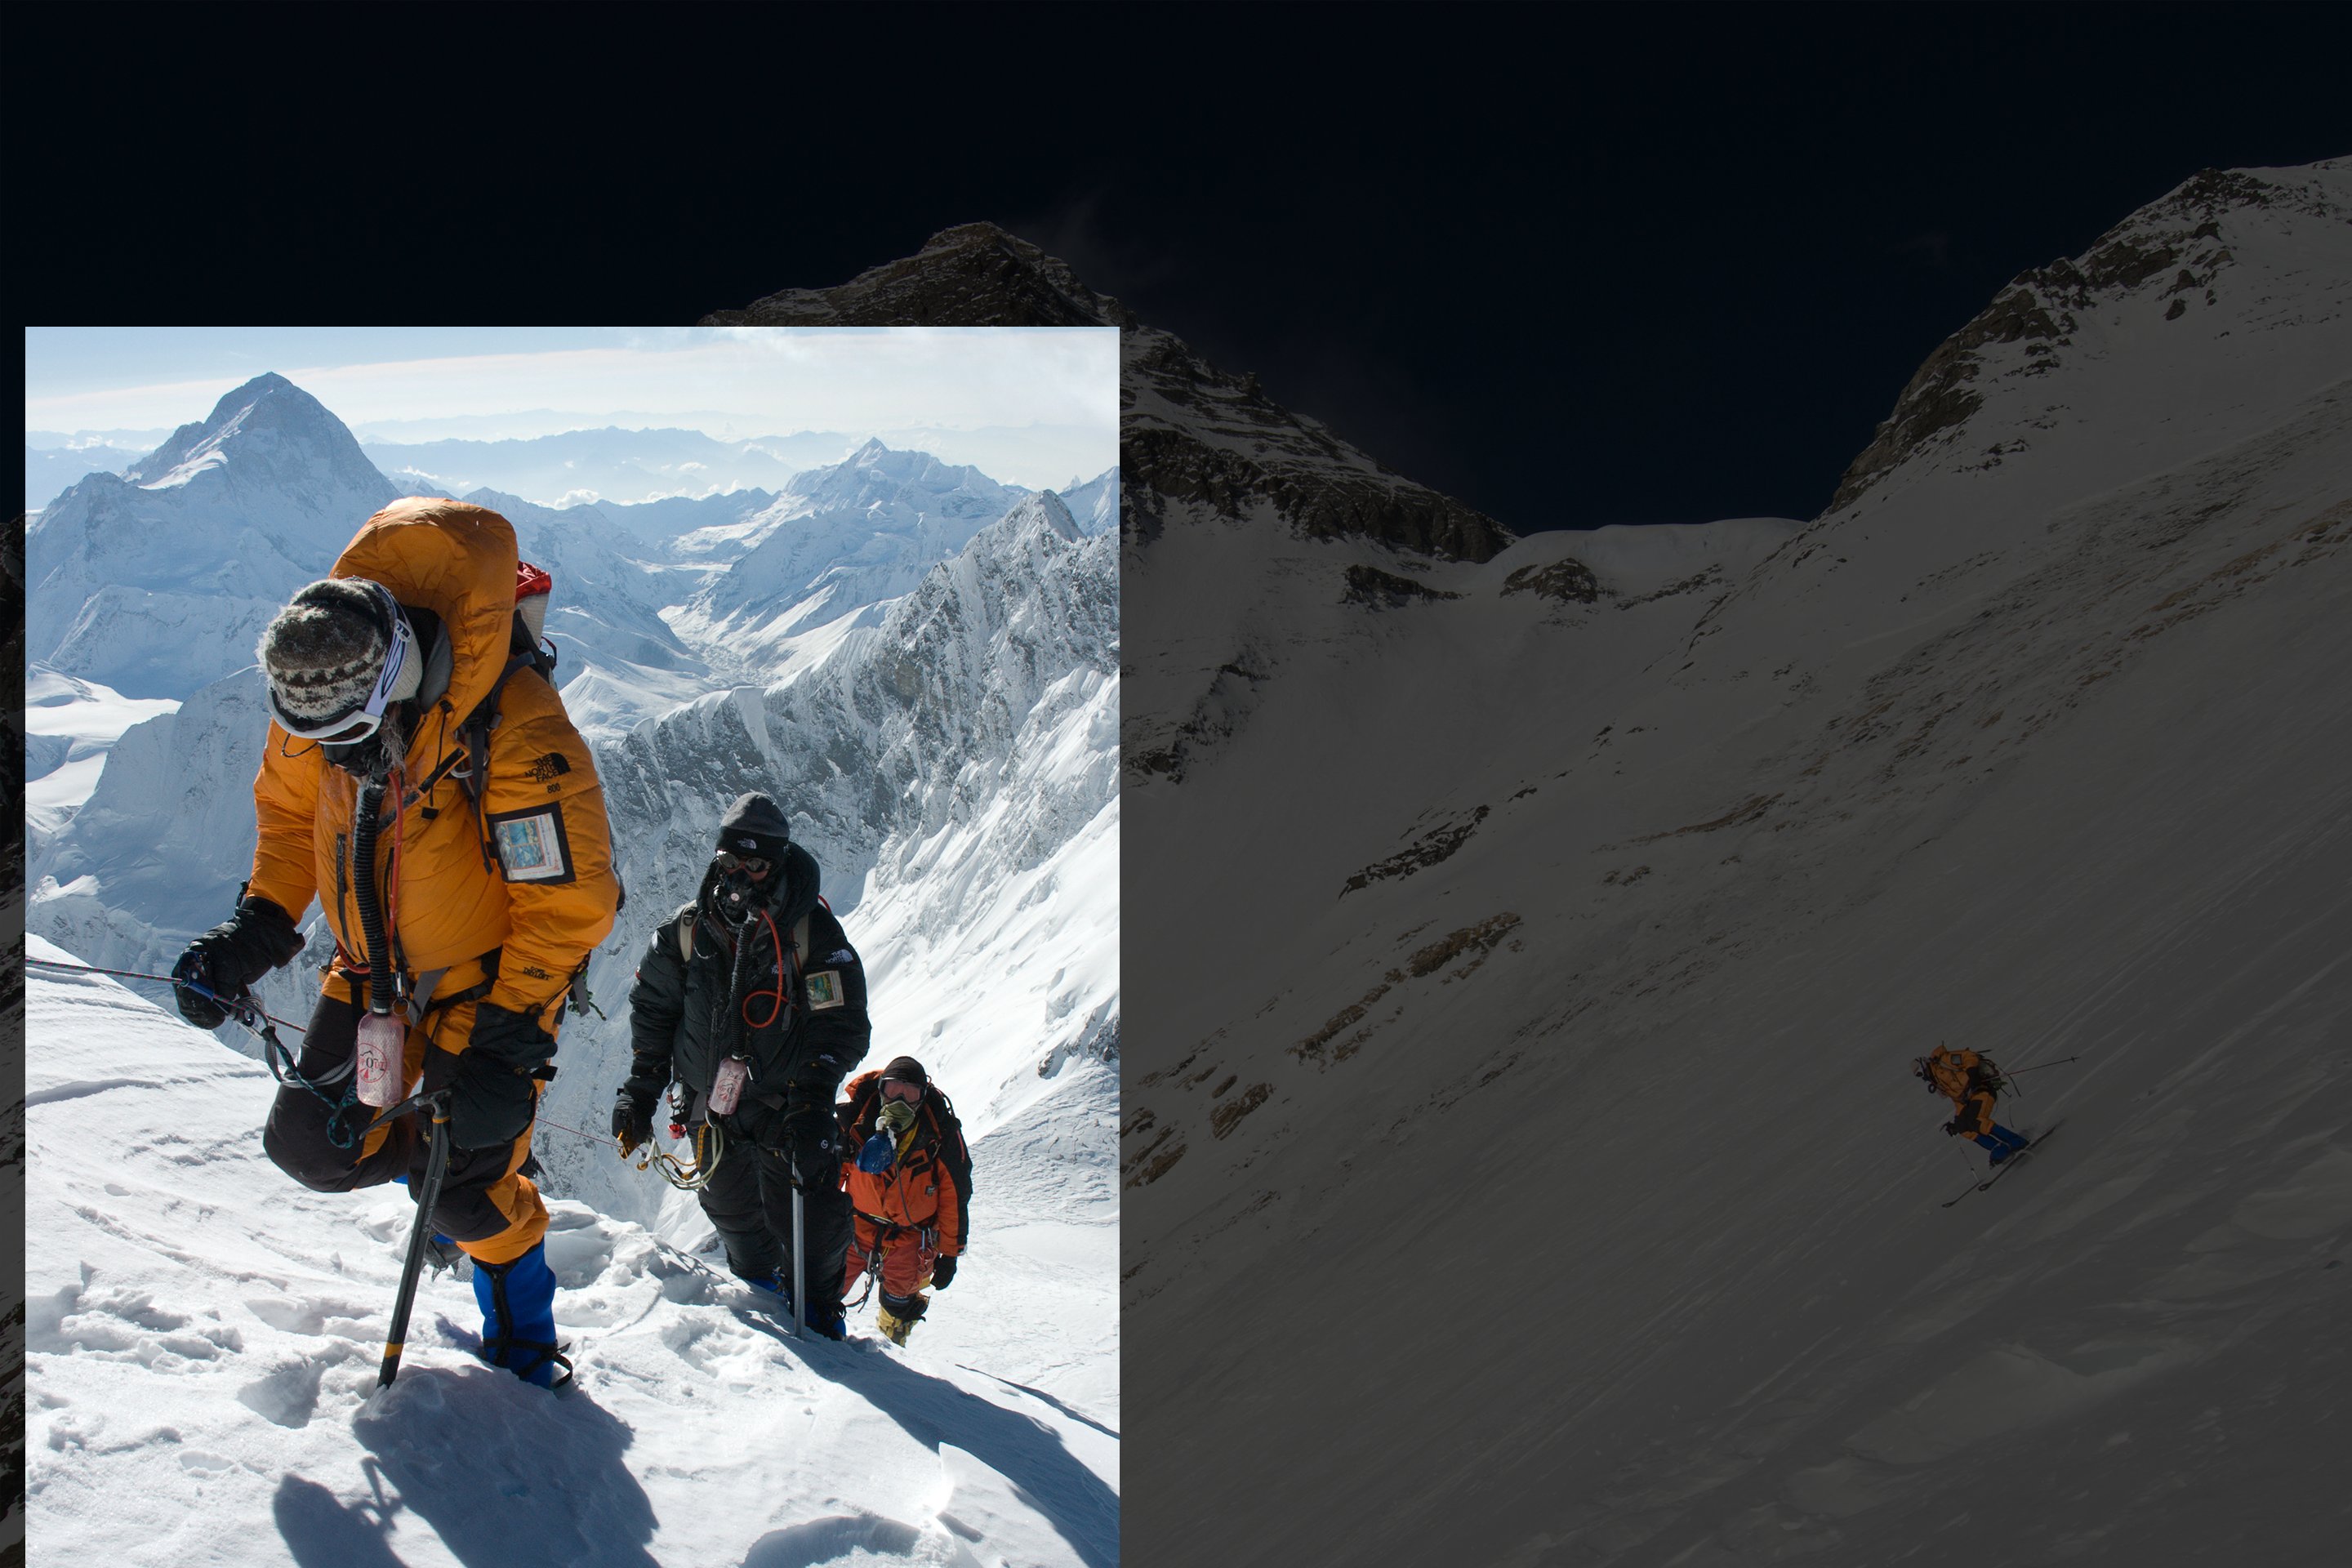 Kit DesLauriers and her team make a high-altitude ascent during her quest to ski the seven summits.